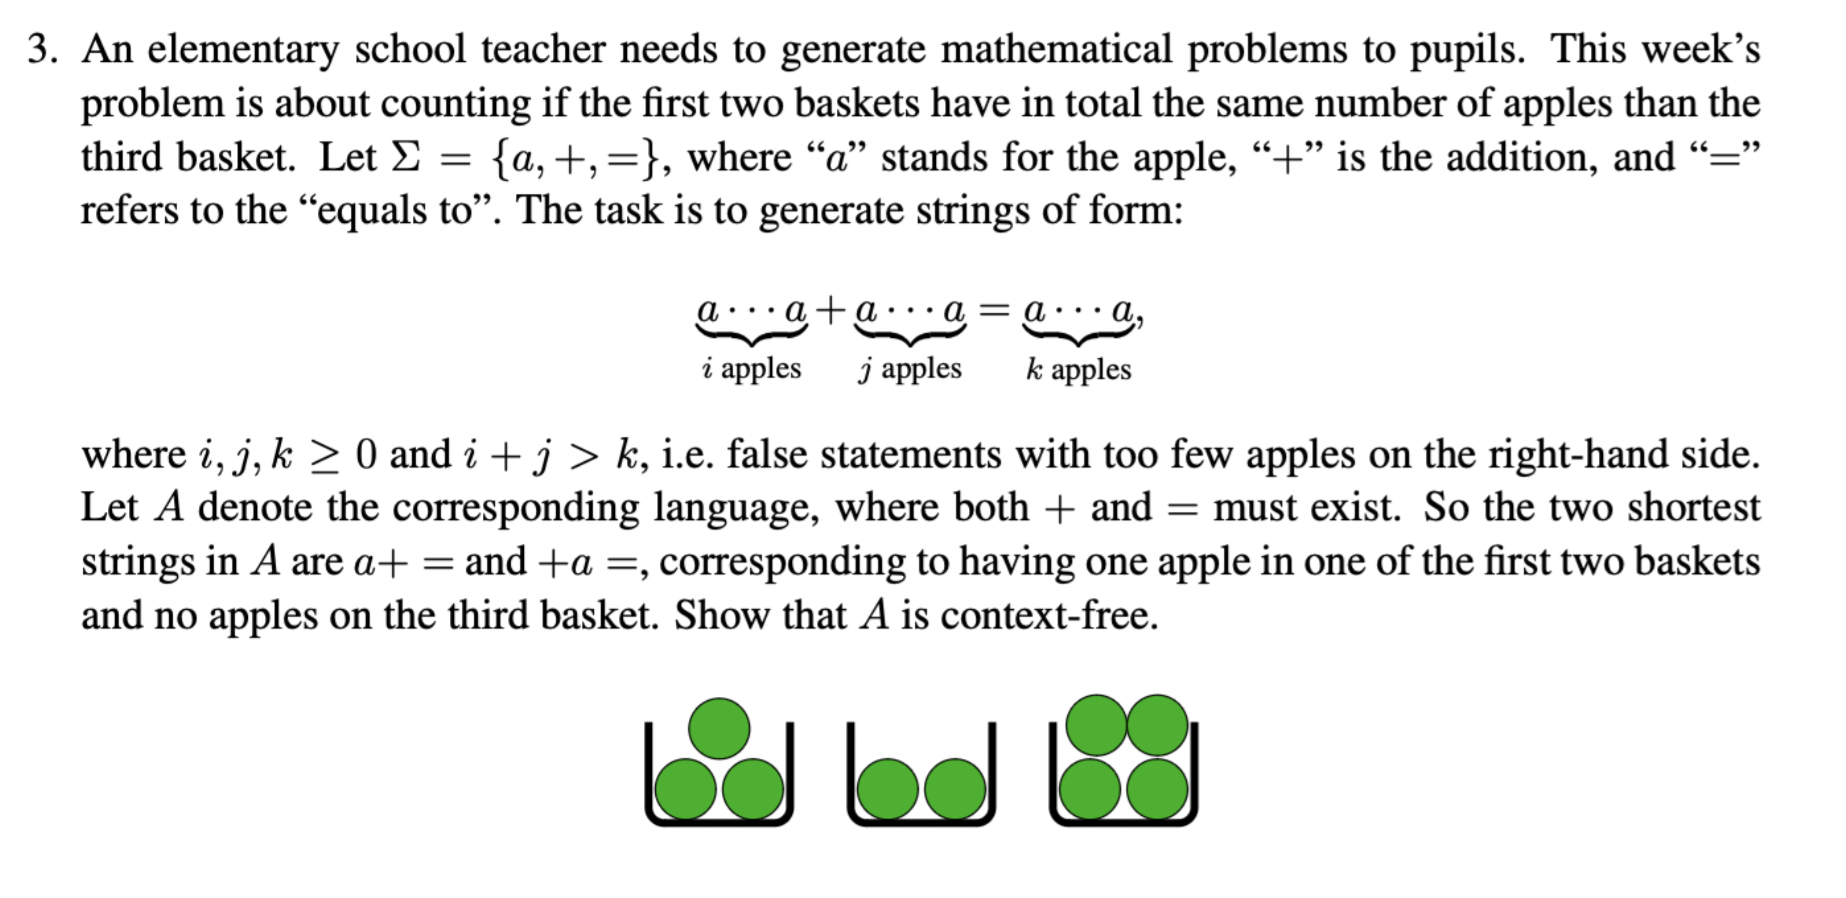 3. An elementary school teacher needs to generate mathematical problems to pupils. This week's problem is